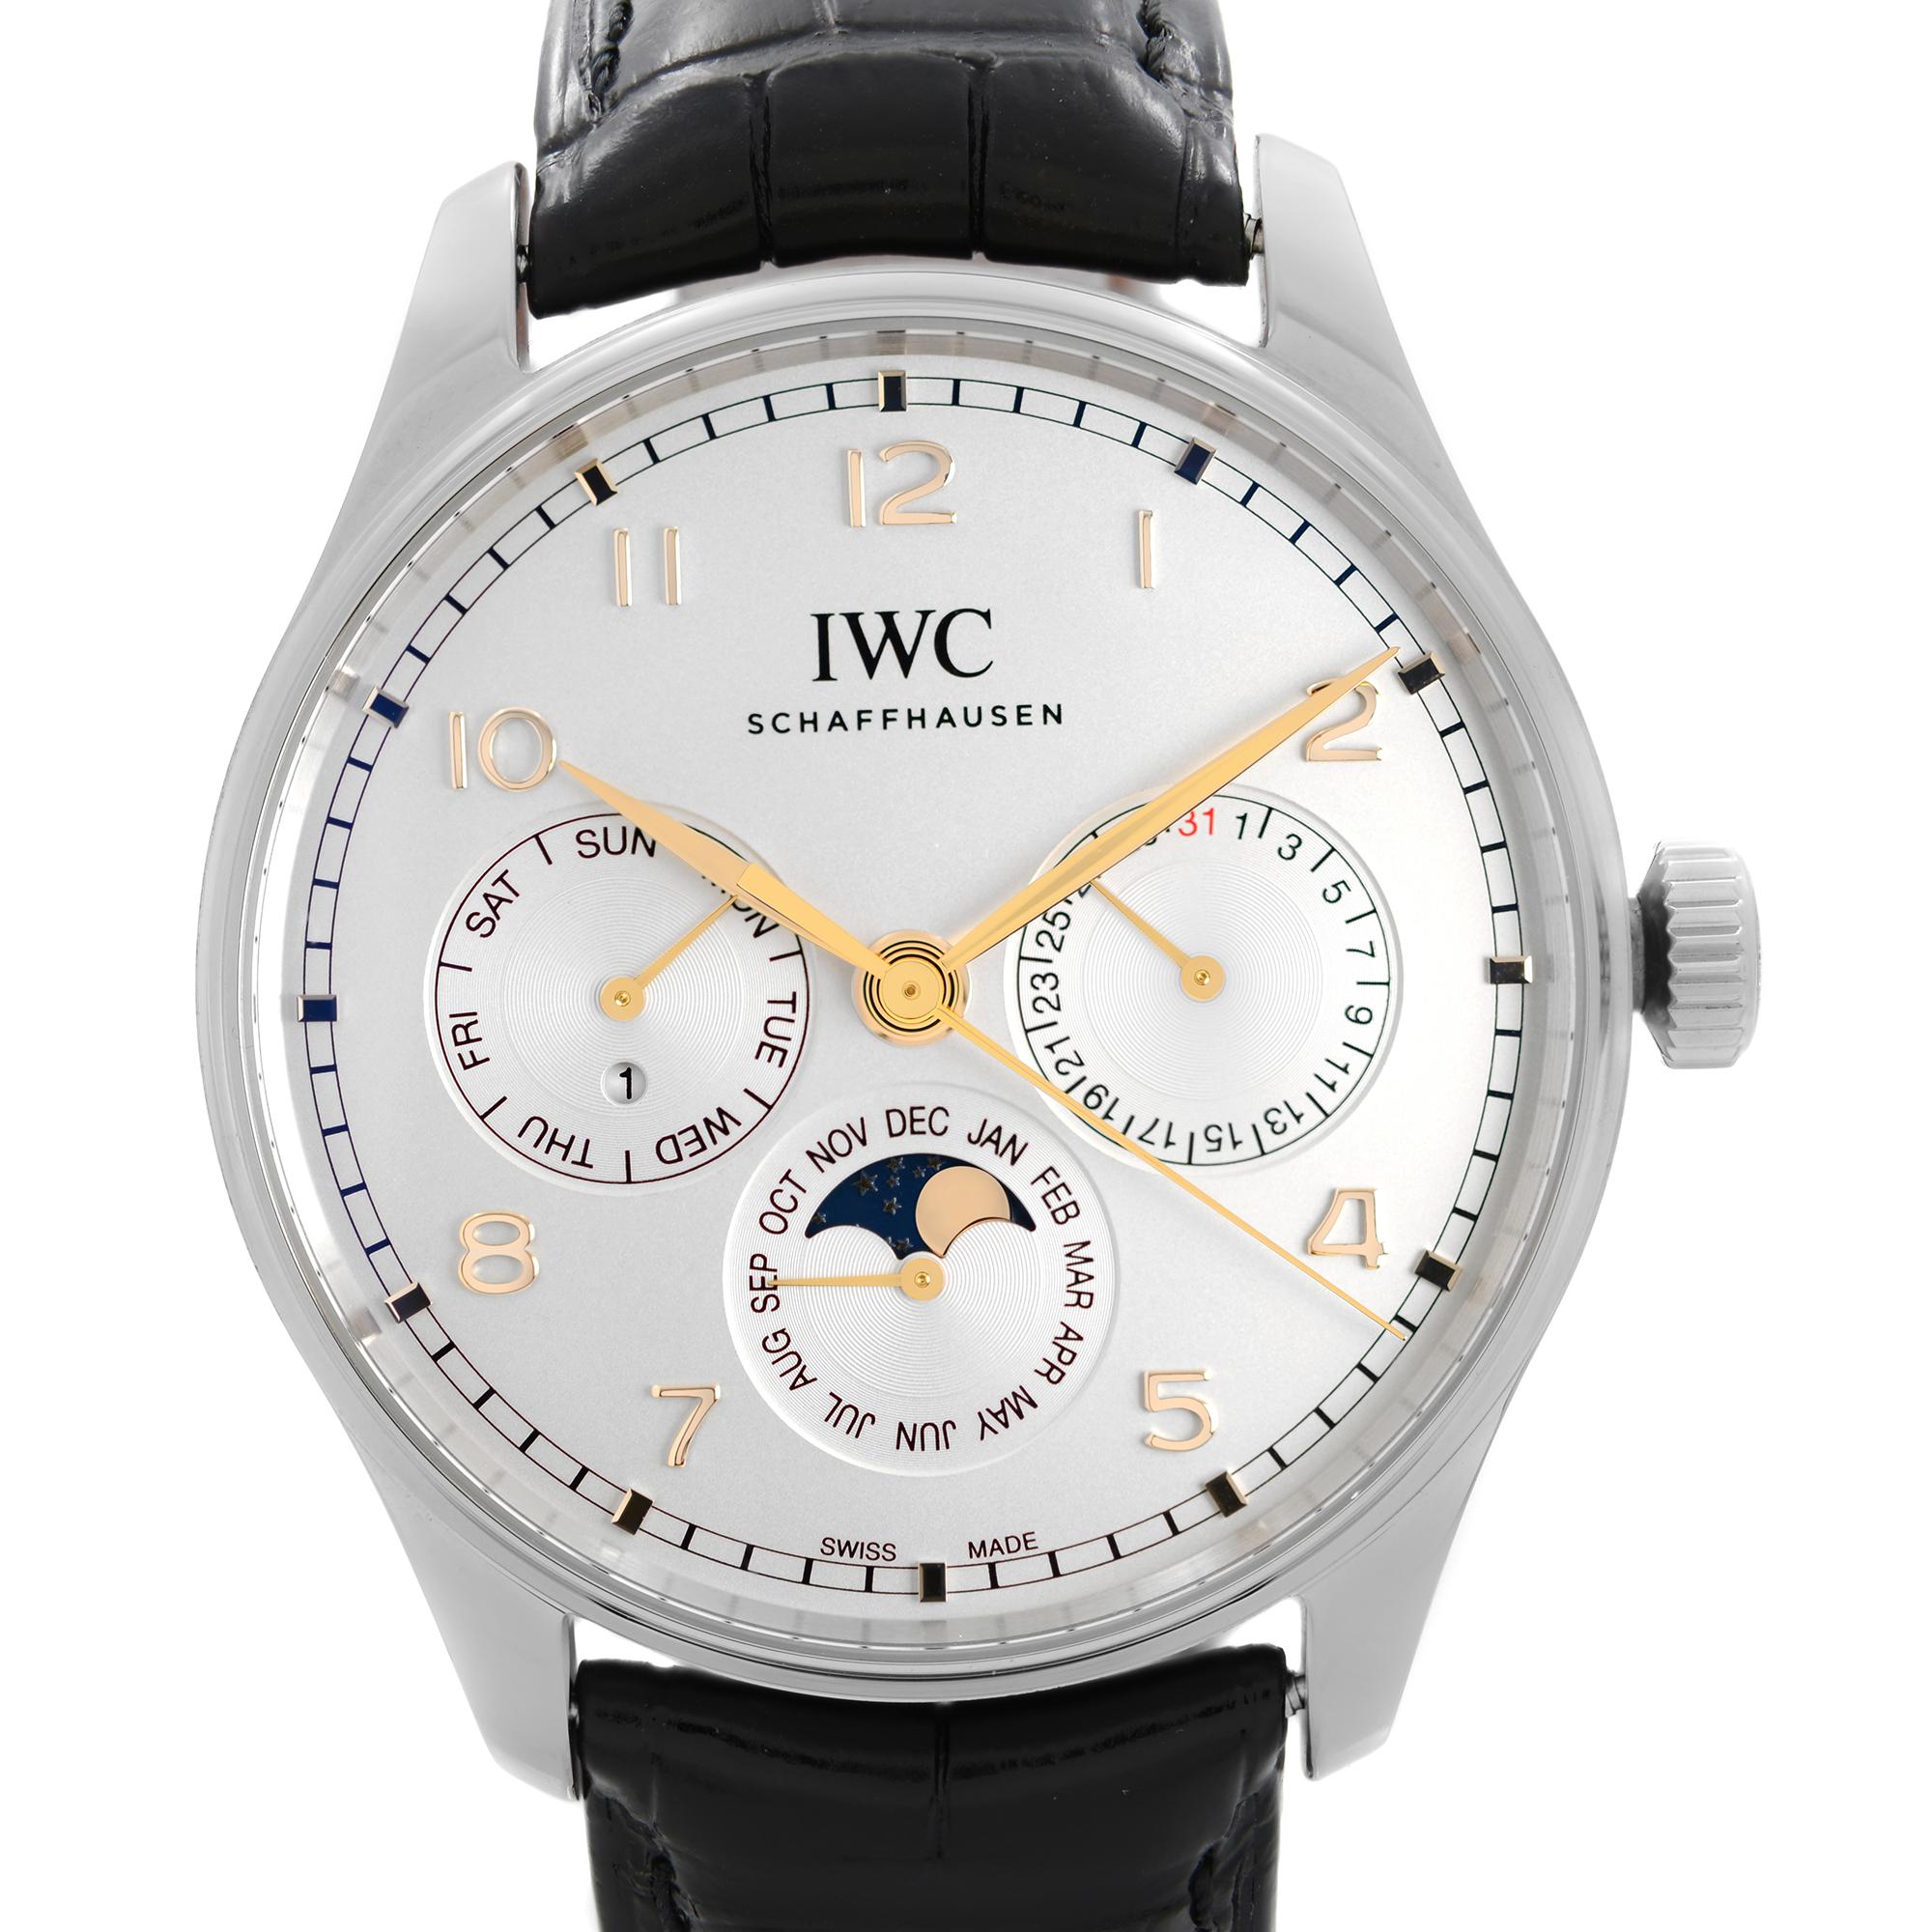 Store Display Model IWC Portugieser 42mm Steel Perpetual Calendar Automatic Men's Watch IW344203. This Beautiful Timepiece is Powered by Mechanical (Automatic) Movement And Features: Round Stainless Steel Case with a Black Alligator Leather Strap,